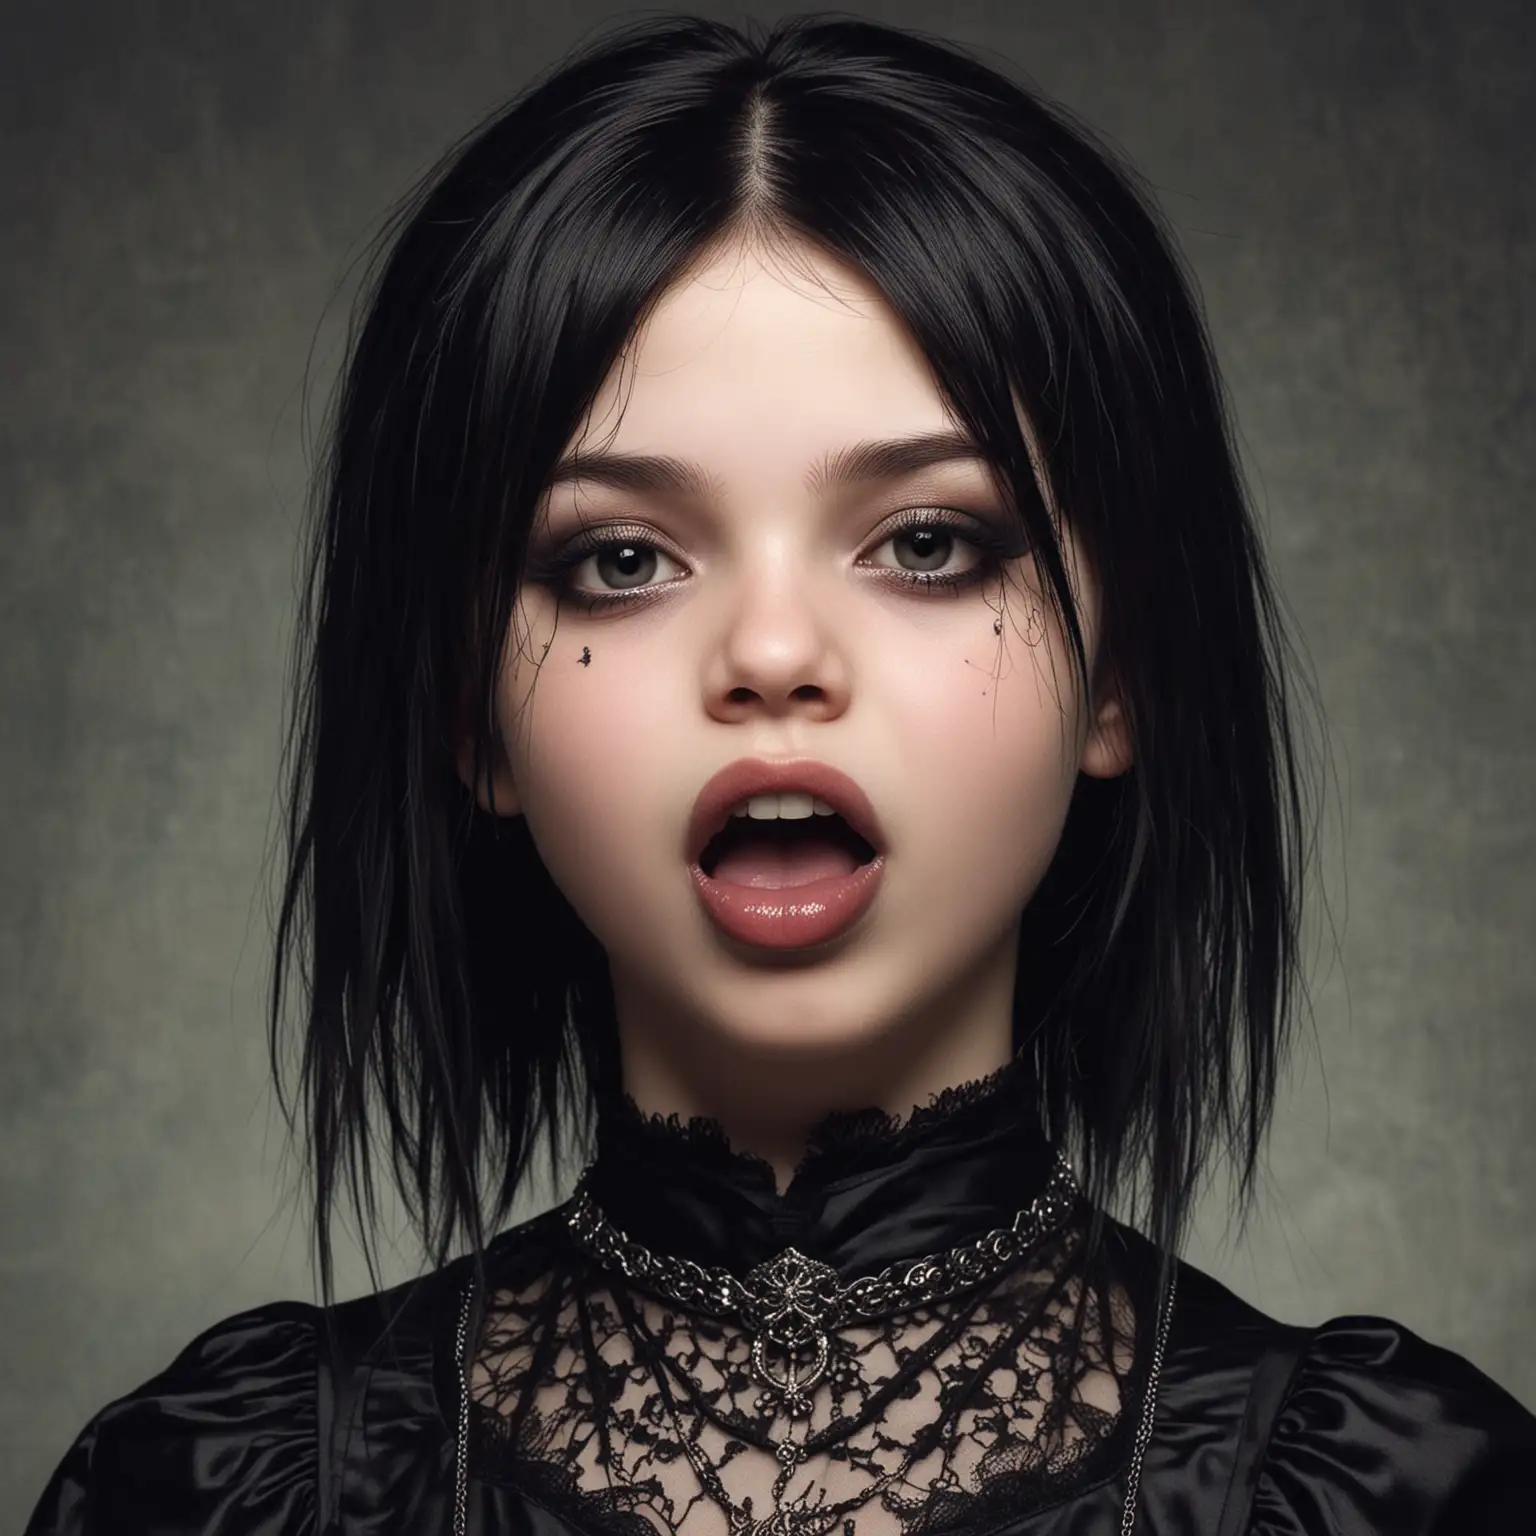  "9 year old goth princess, 'mouth closed', tongue out, full profile" - The input seems to be in English and contains a description of someone's appearance. I don't see any need for translation here, as the input is already in English. So, my output will be the same as the input:

9 year old goth princess, "mouth closed", tongue out, full profile